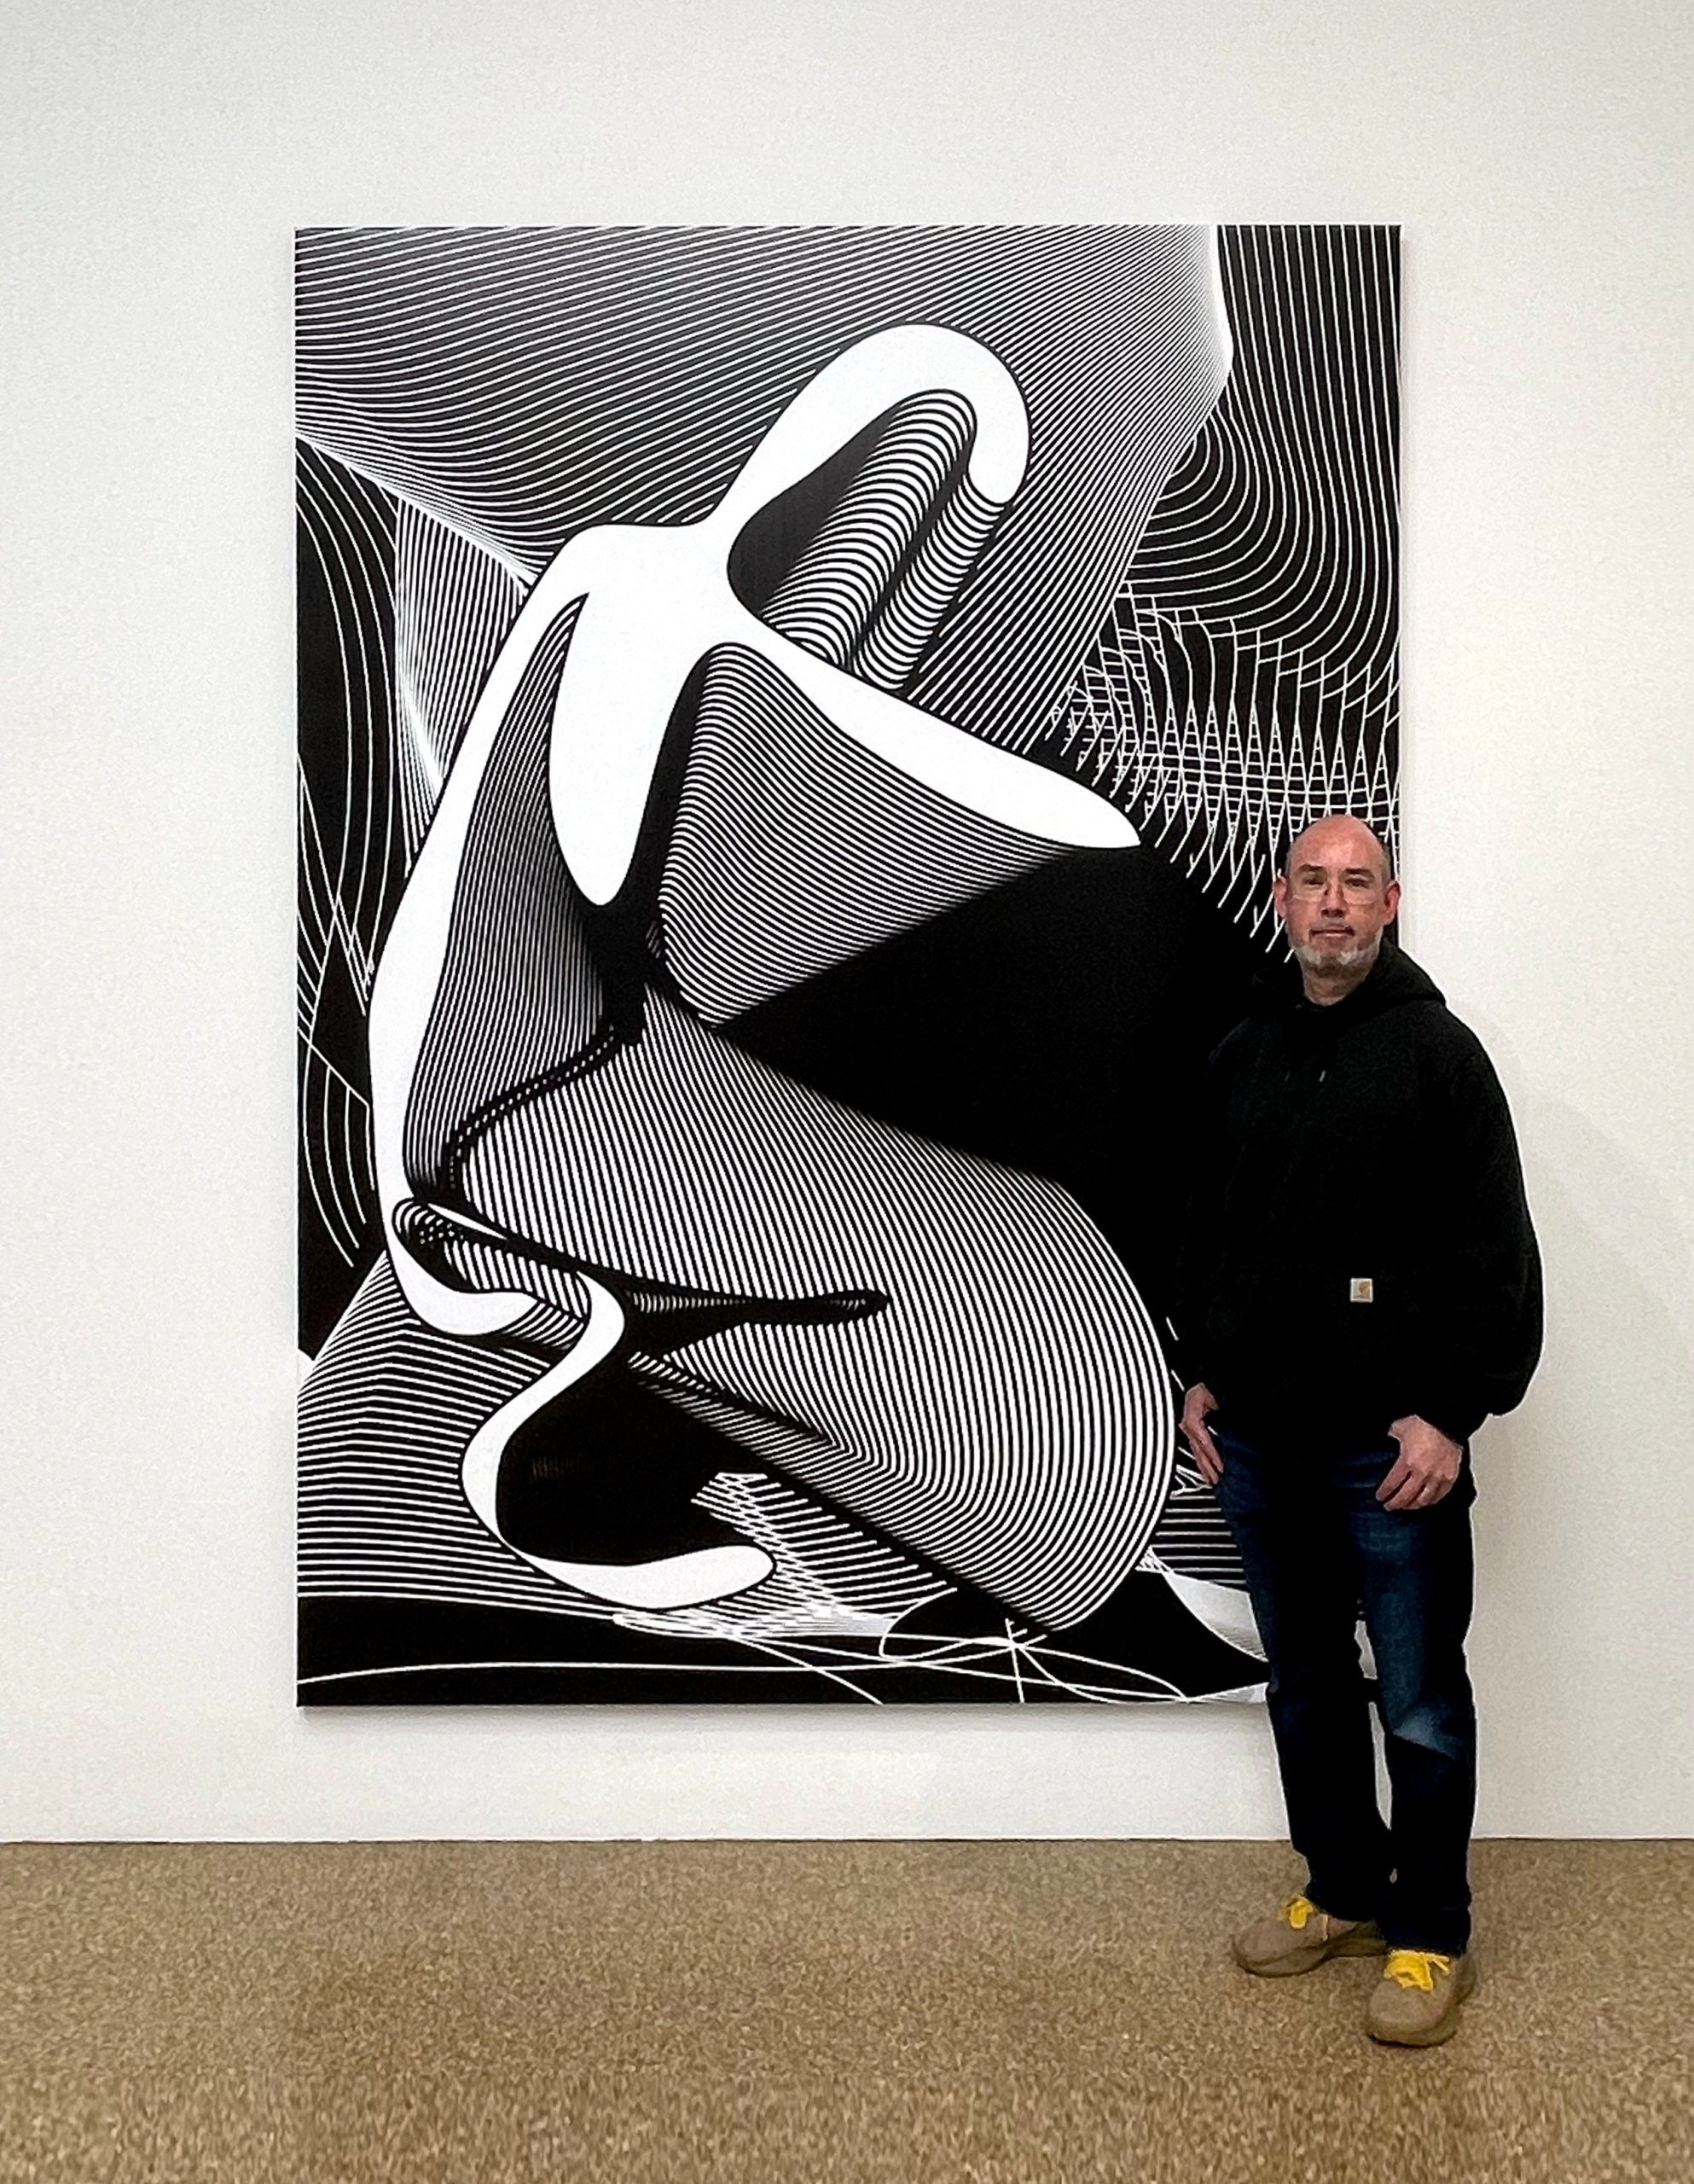 Colin Goldberg with his "Kneeling Icon" print at Techspressionism exhibition